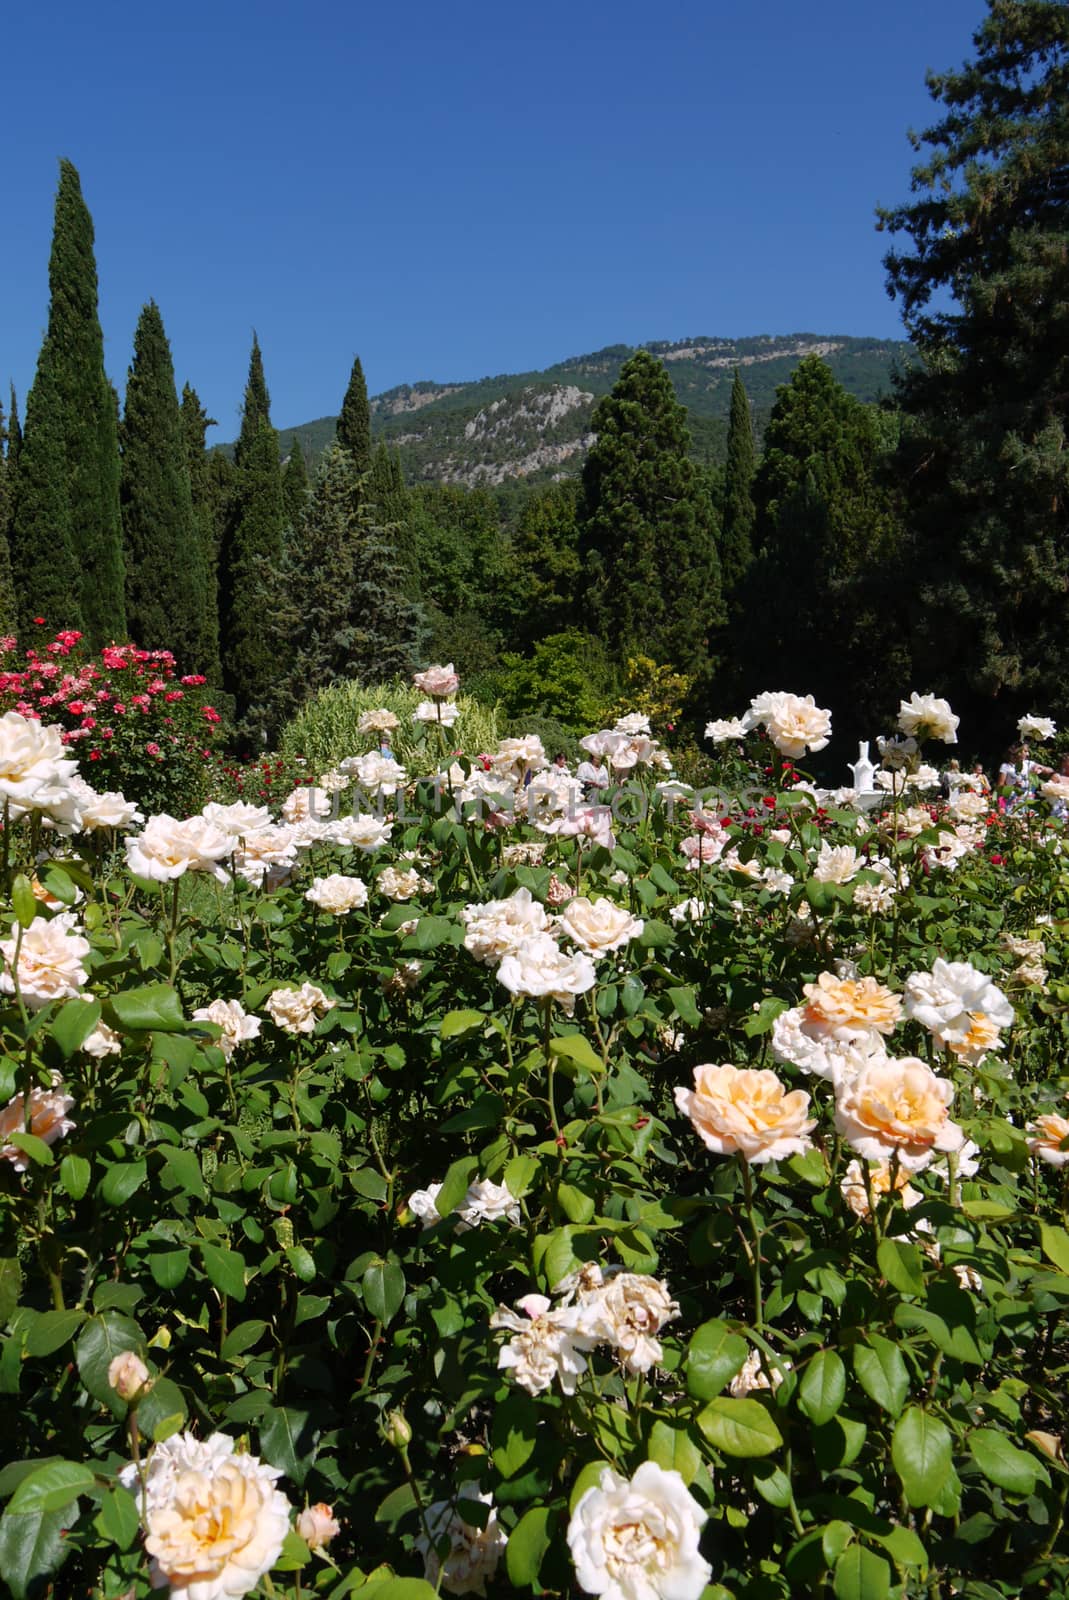 A glade on a mountain slope with growing roses of different colo by Adamchuk